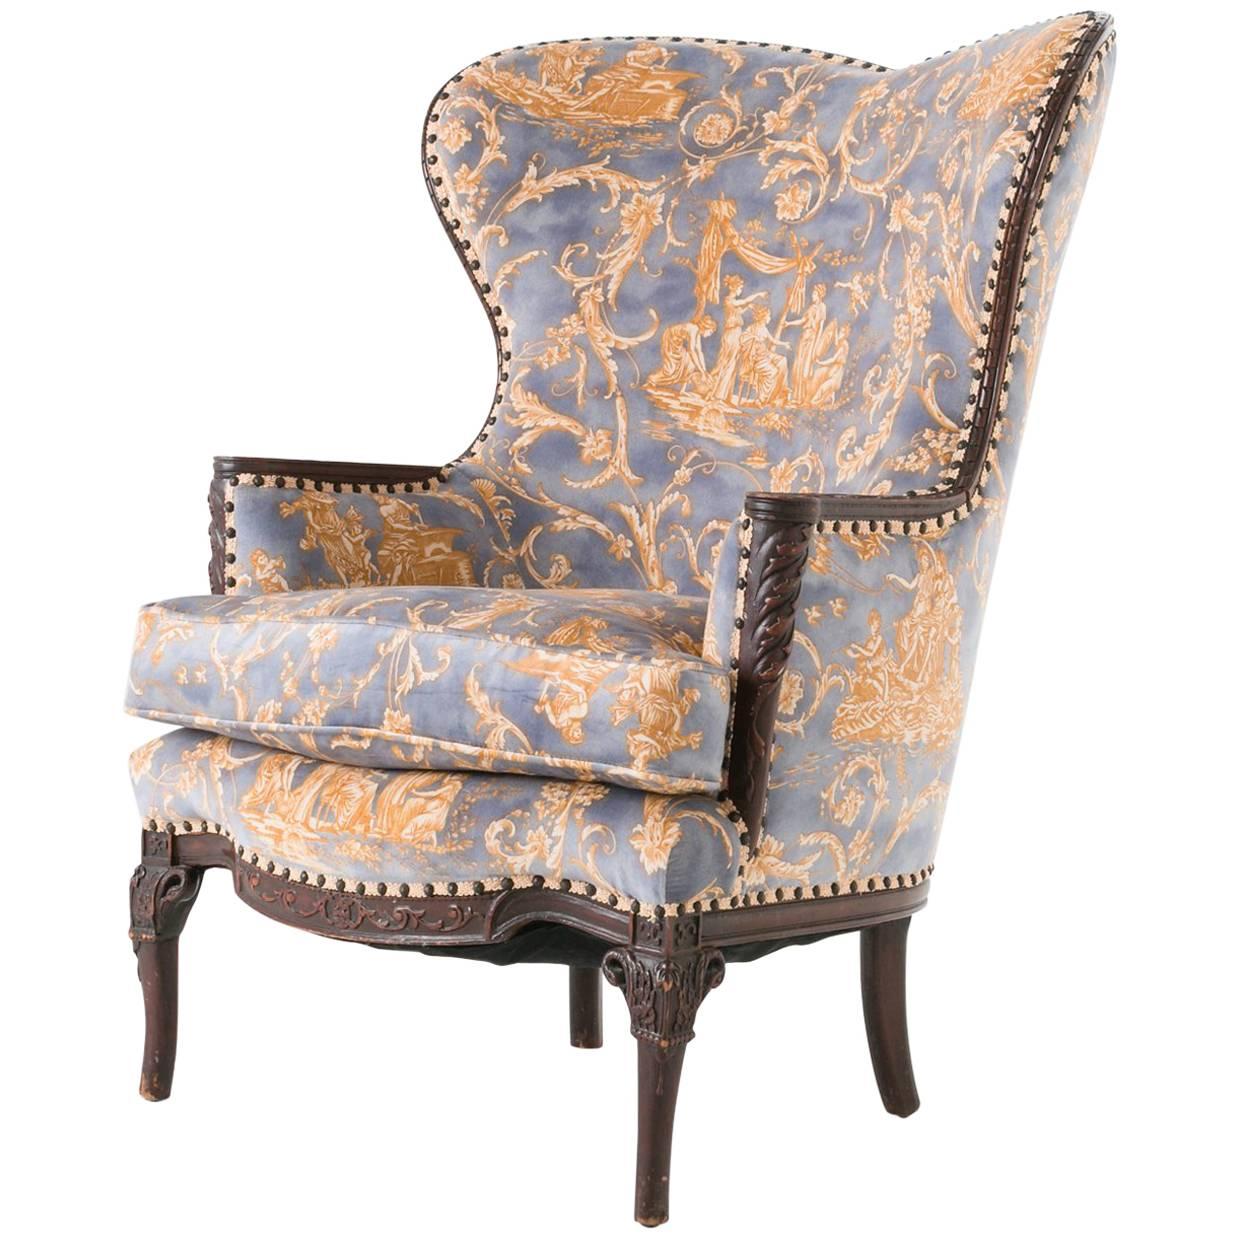 Unusual Louis XV Heart Shape Bergère Armchair with Hermes Toile Upholstery